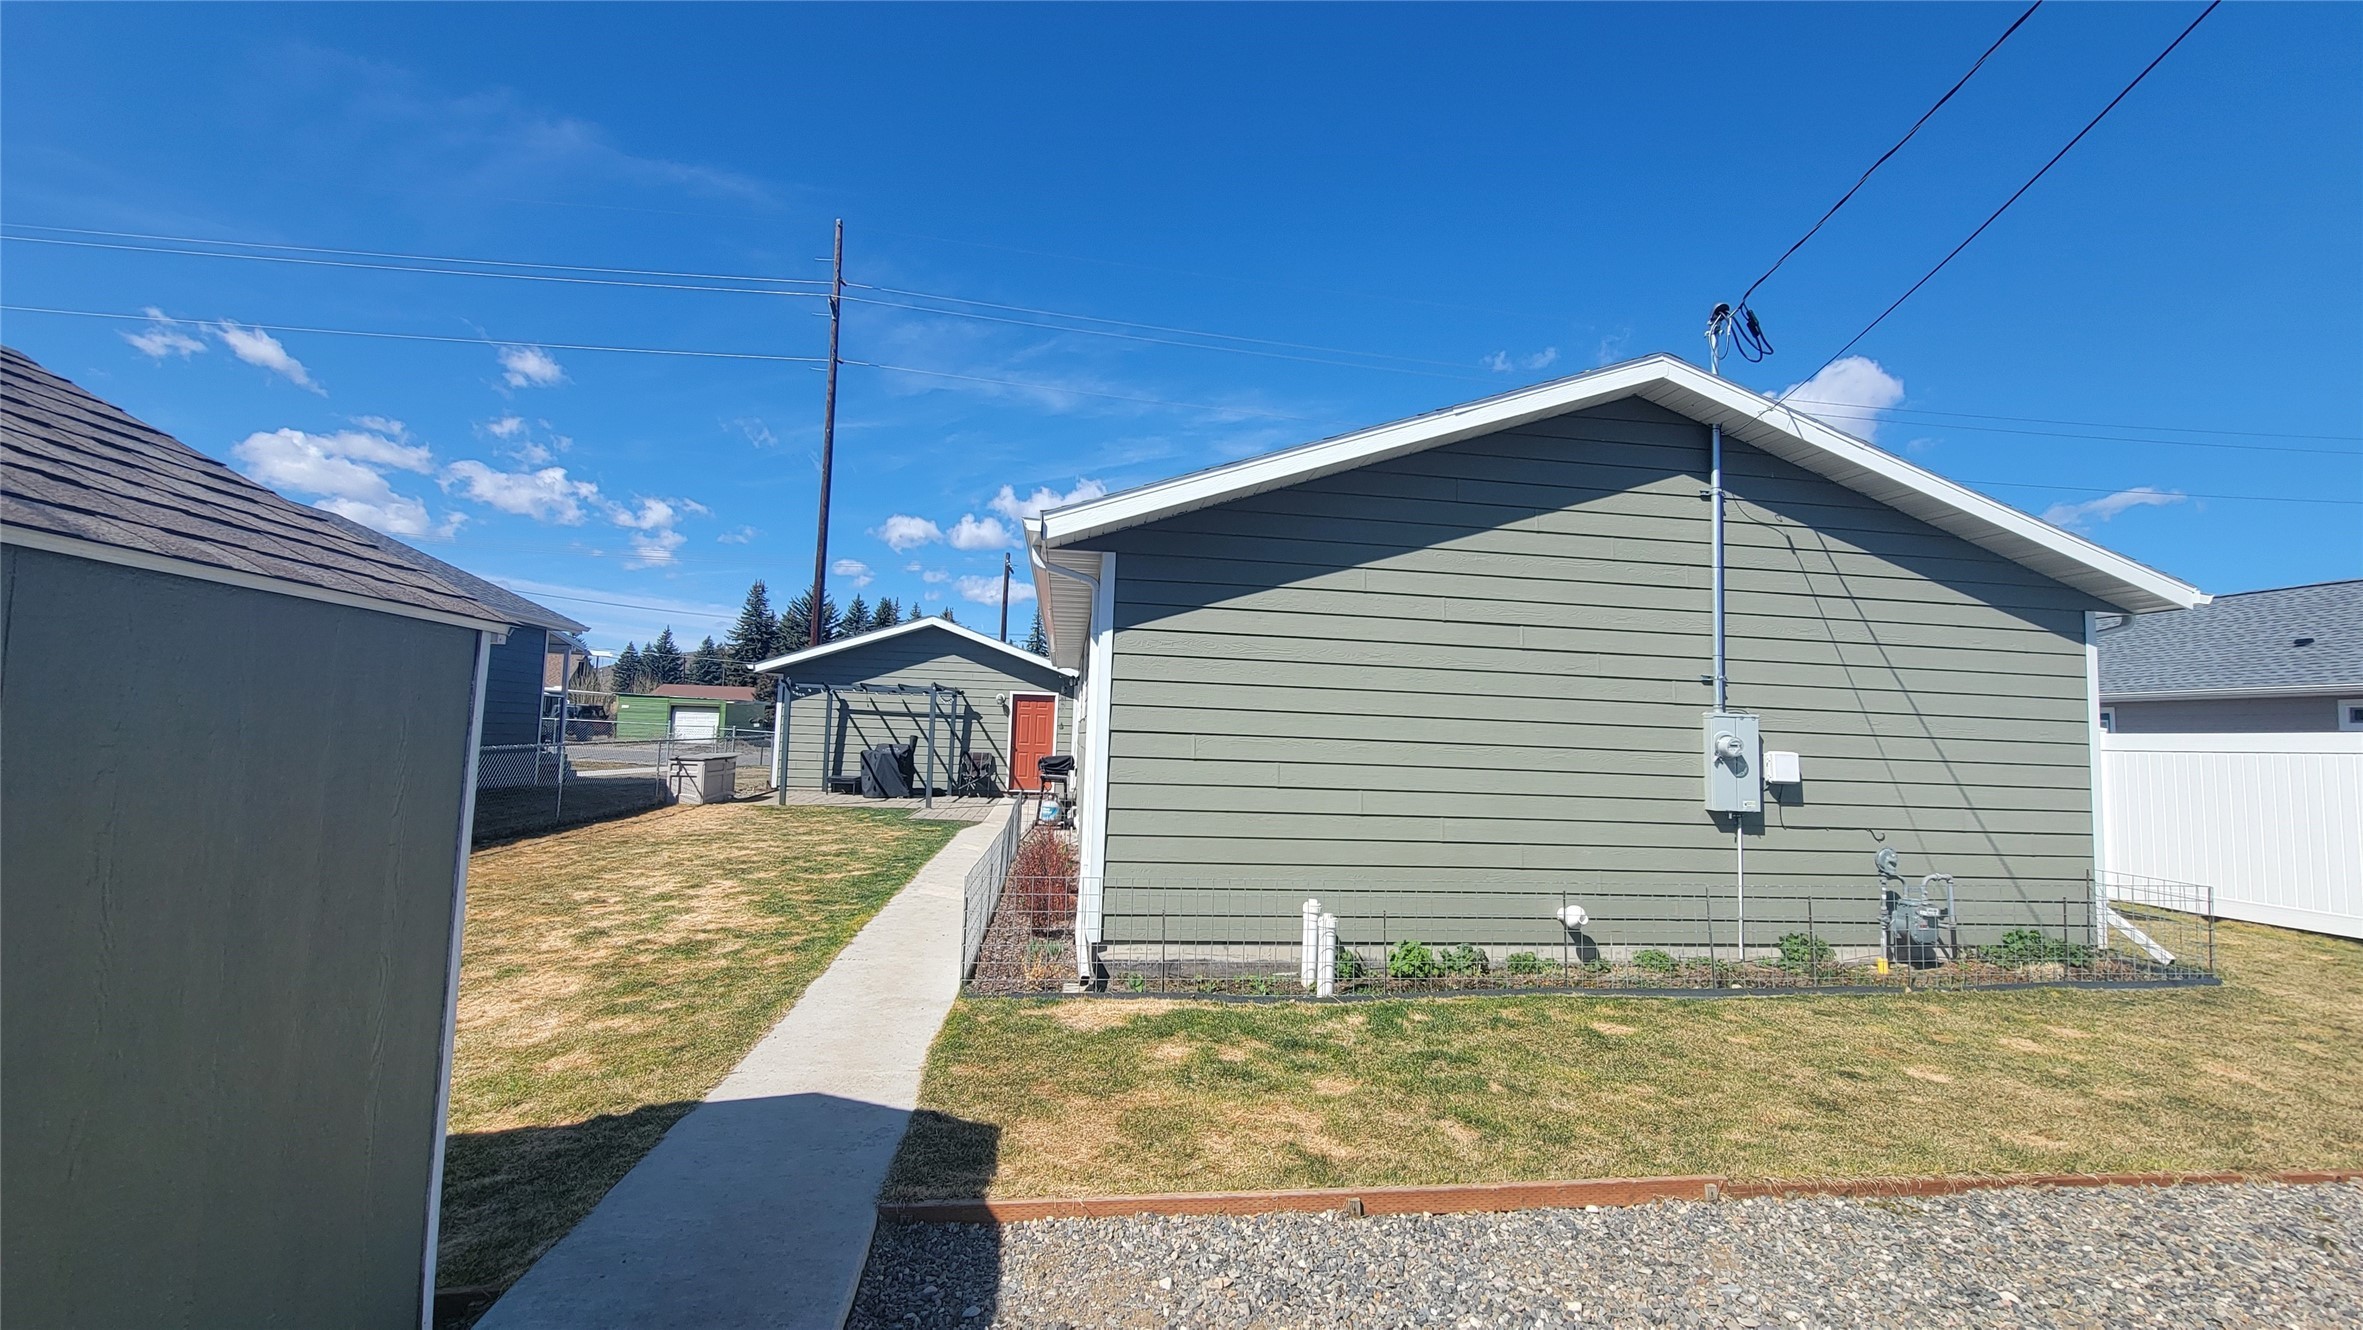 2. 2552 Placer Street